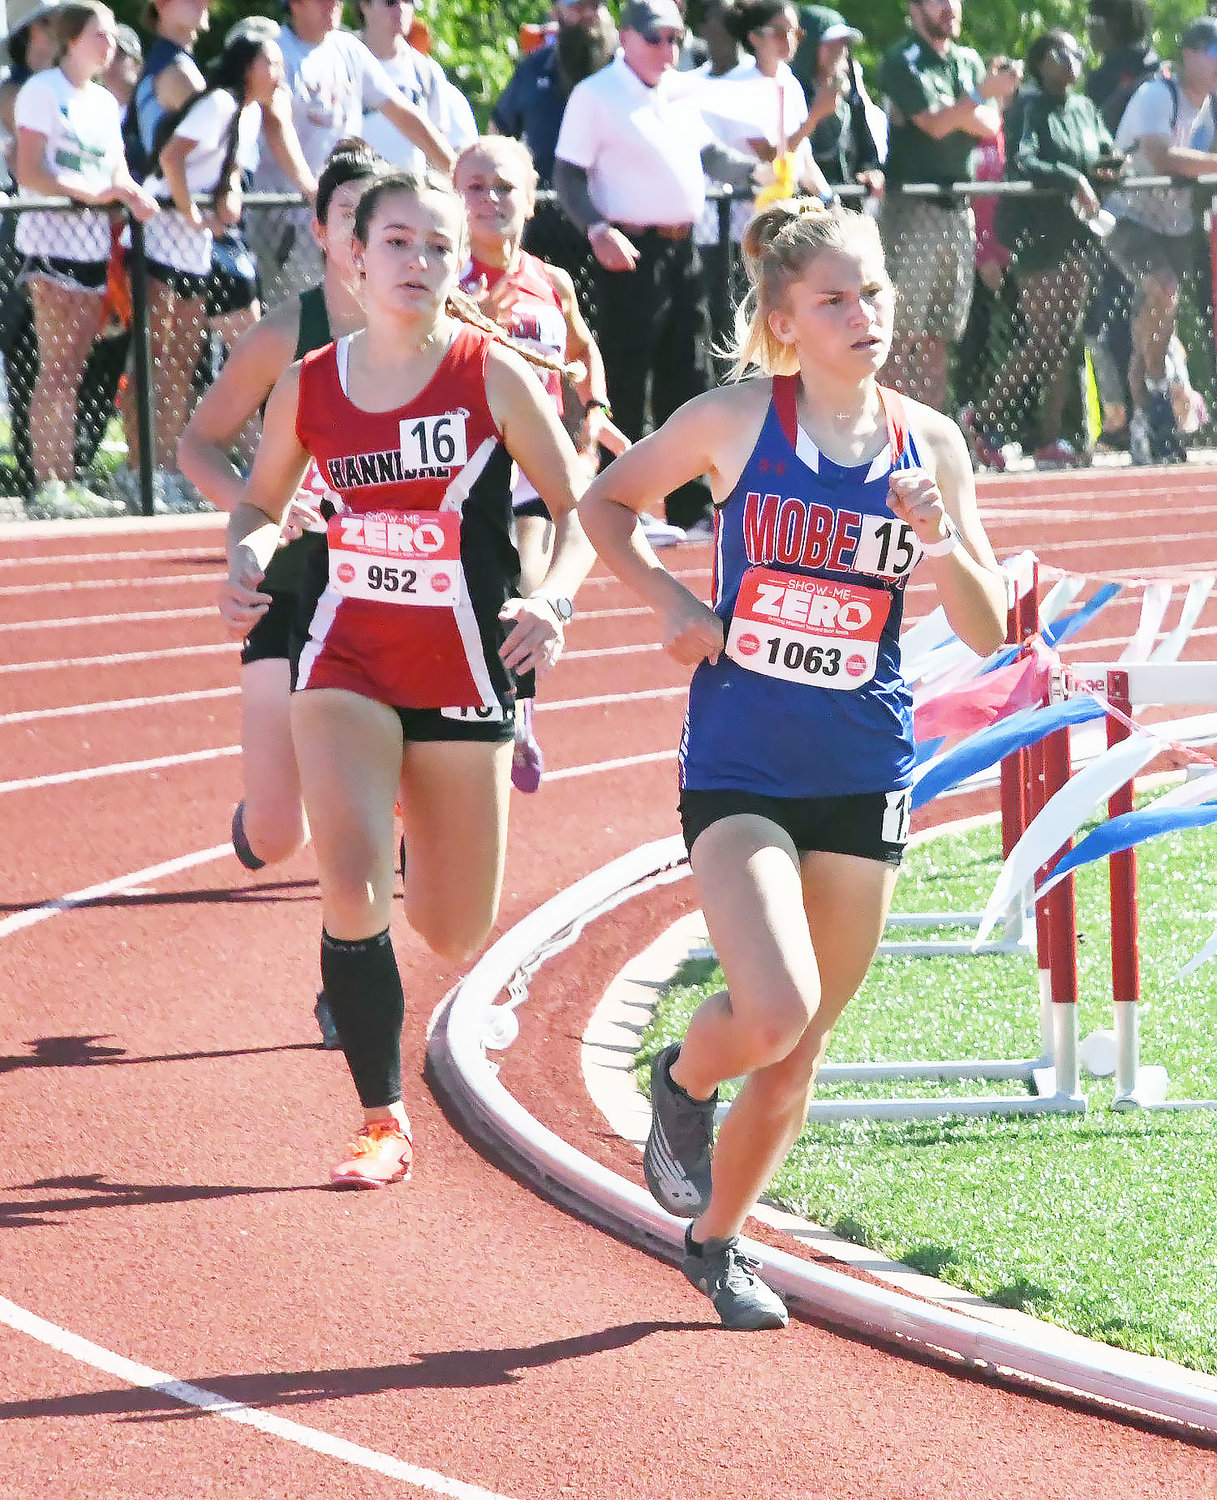 Anna Rivera completes the fourth turn during the open 800-meter run on Friday afternoon. Rivera recorded a time of 2:31.90, good enough for 13th.